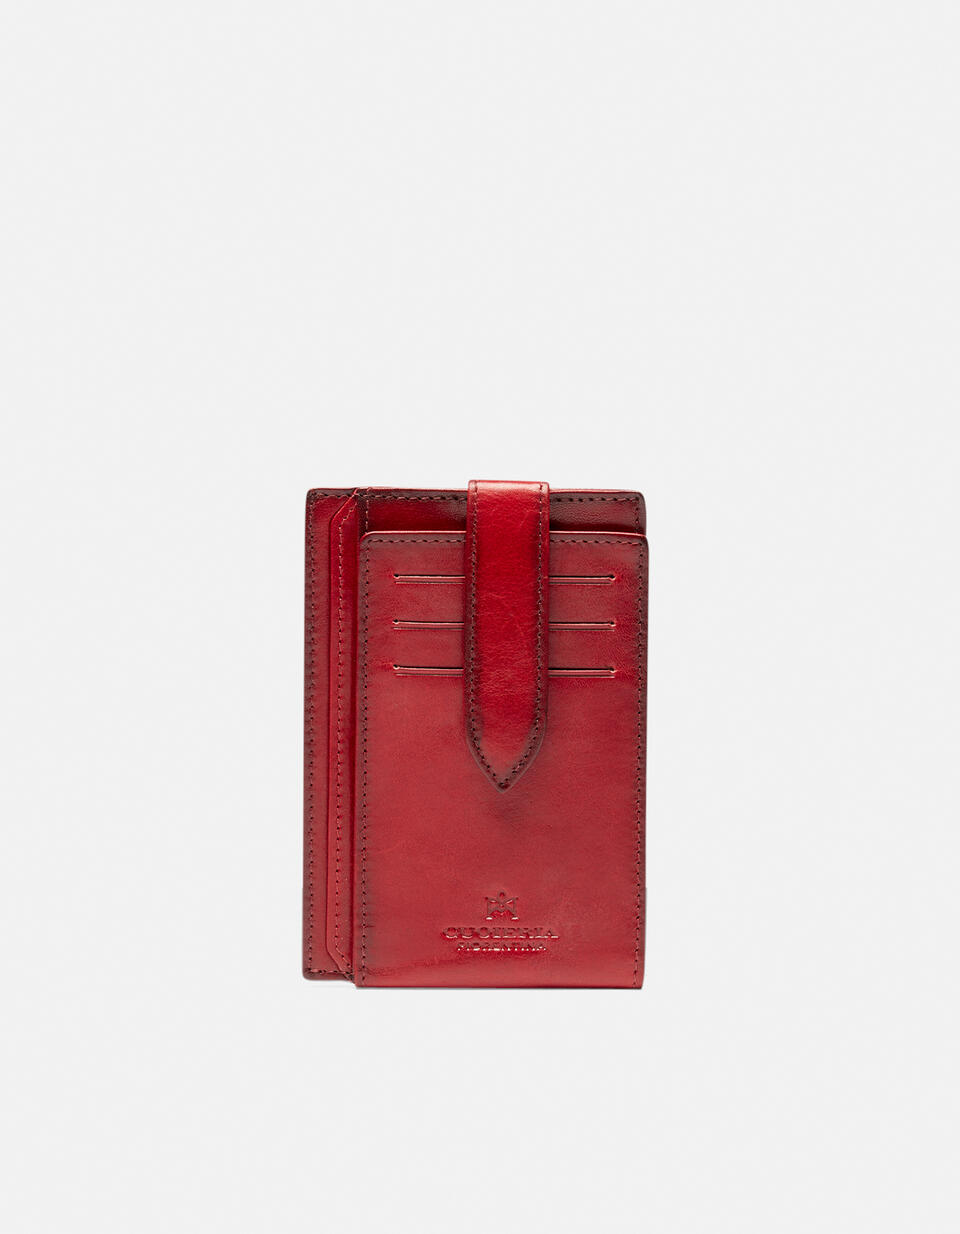 Warm and Color Anti-RFID cardholder - Women's Wallets - Men's Wallets | Wallets Mimì ROSSO - Women's Wallets - Men's Wallets | WalletsCuoieria Fiorentina